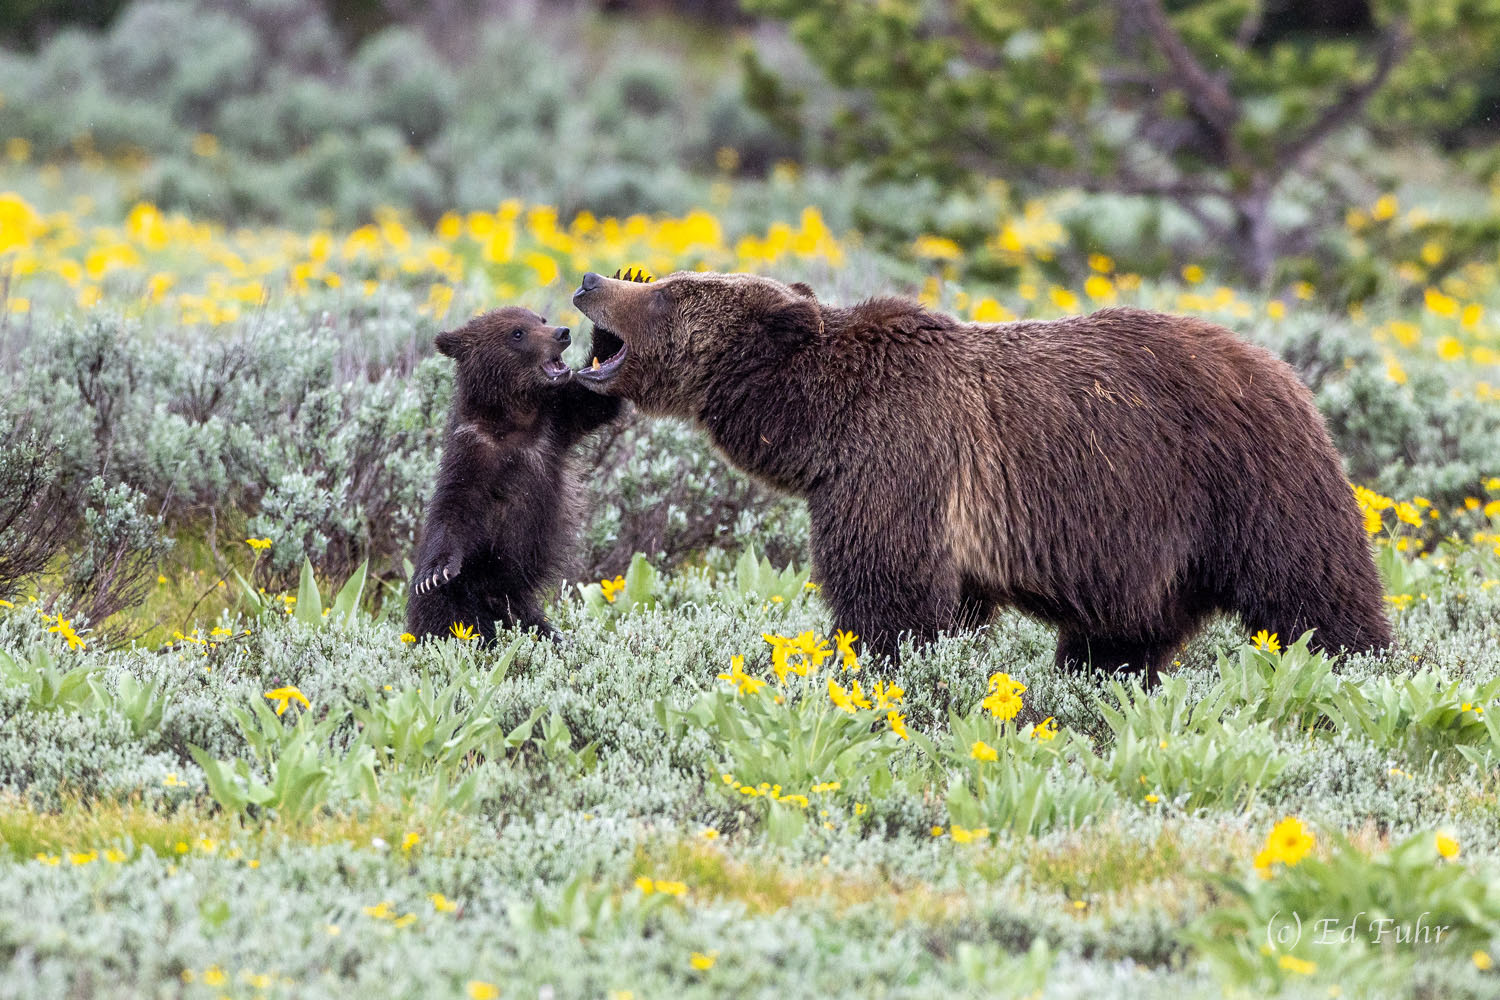 Nothing epitomizes the great wild spaces in our land like the grizzly bear, especially when you can see them in flower-covered...